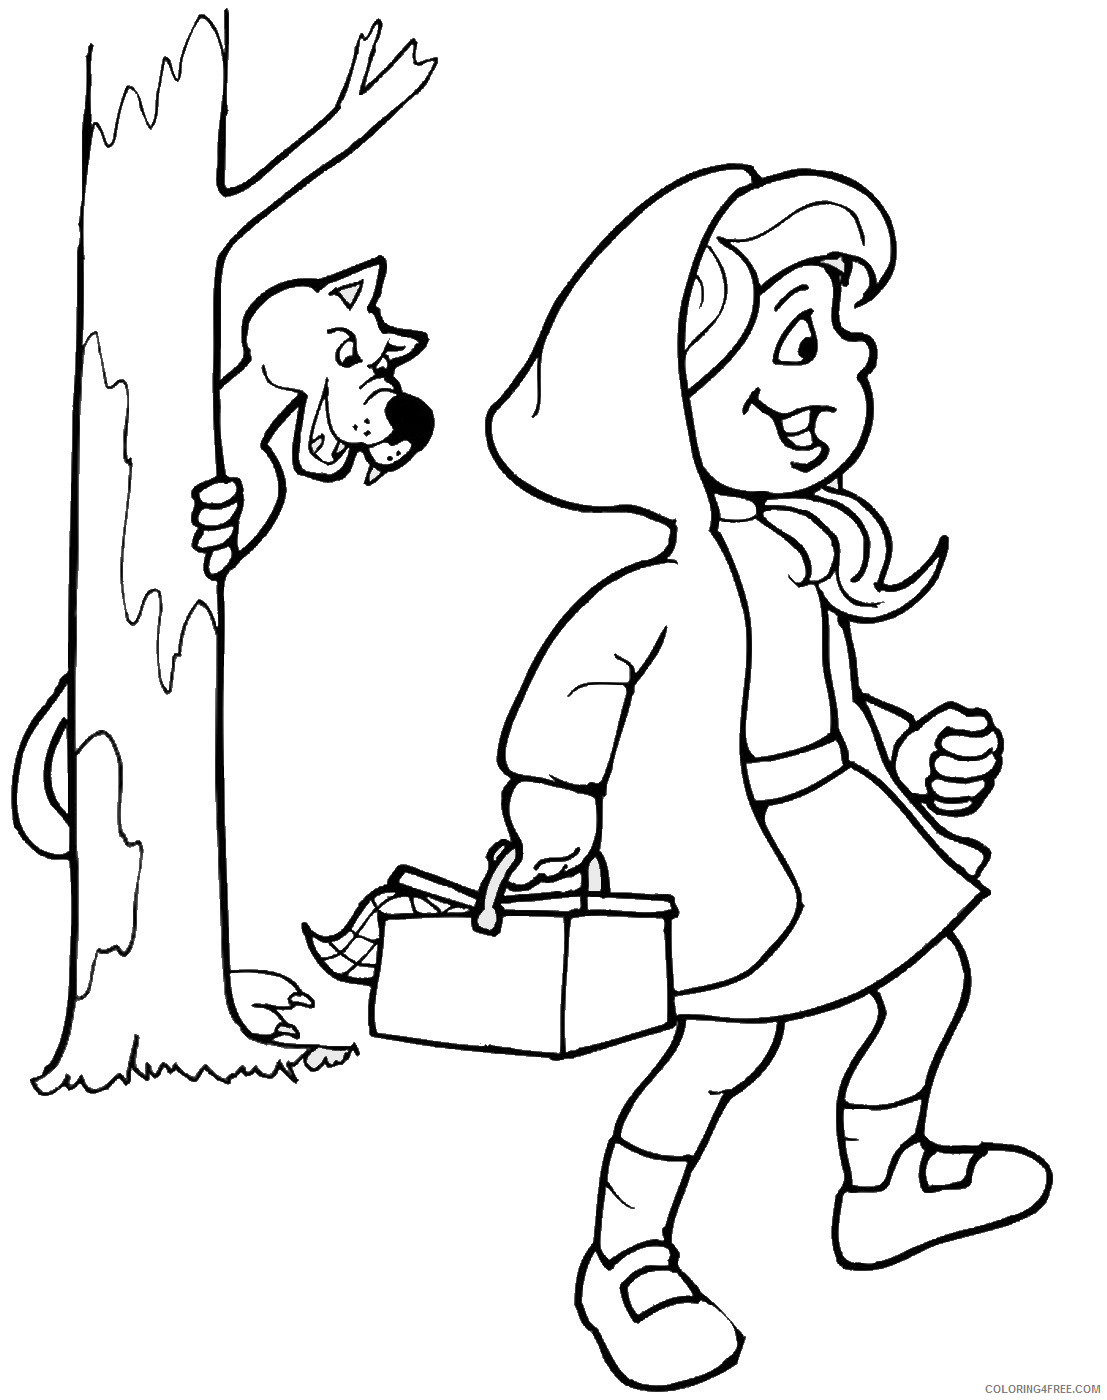 Little Red Riding Hood Coloring Pages Cartoons little_red_ridinghood_22 Printable 2020 3861 Coloring4free